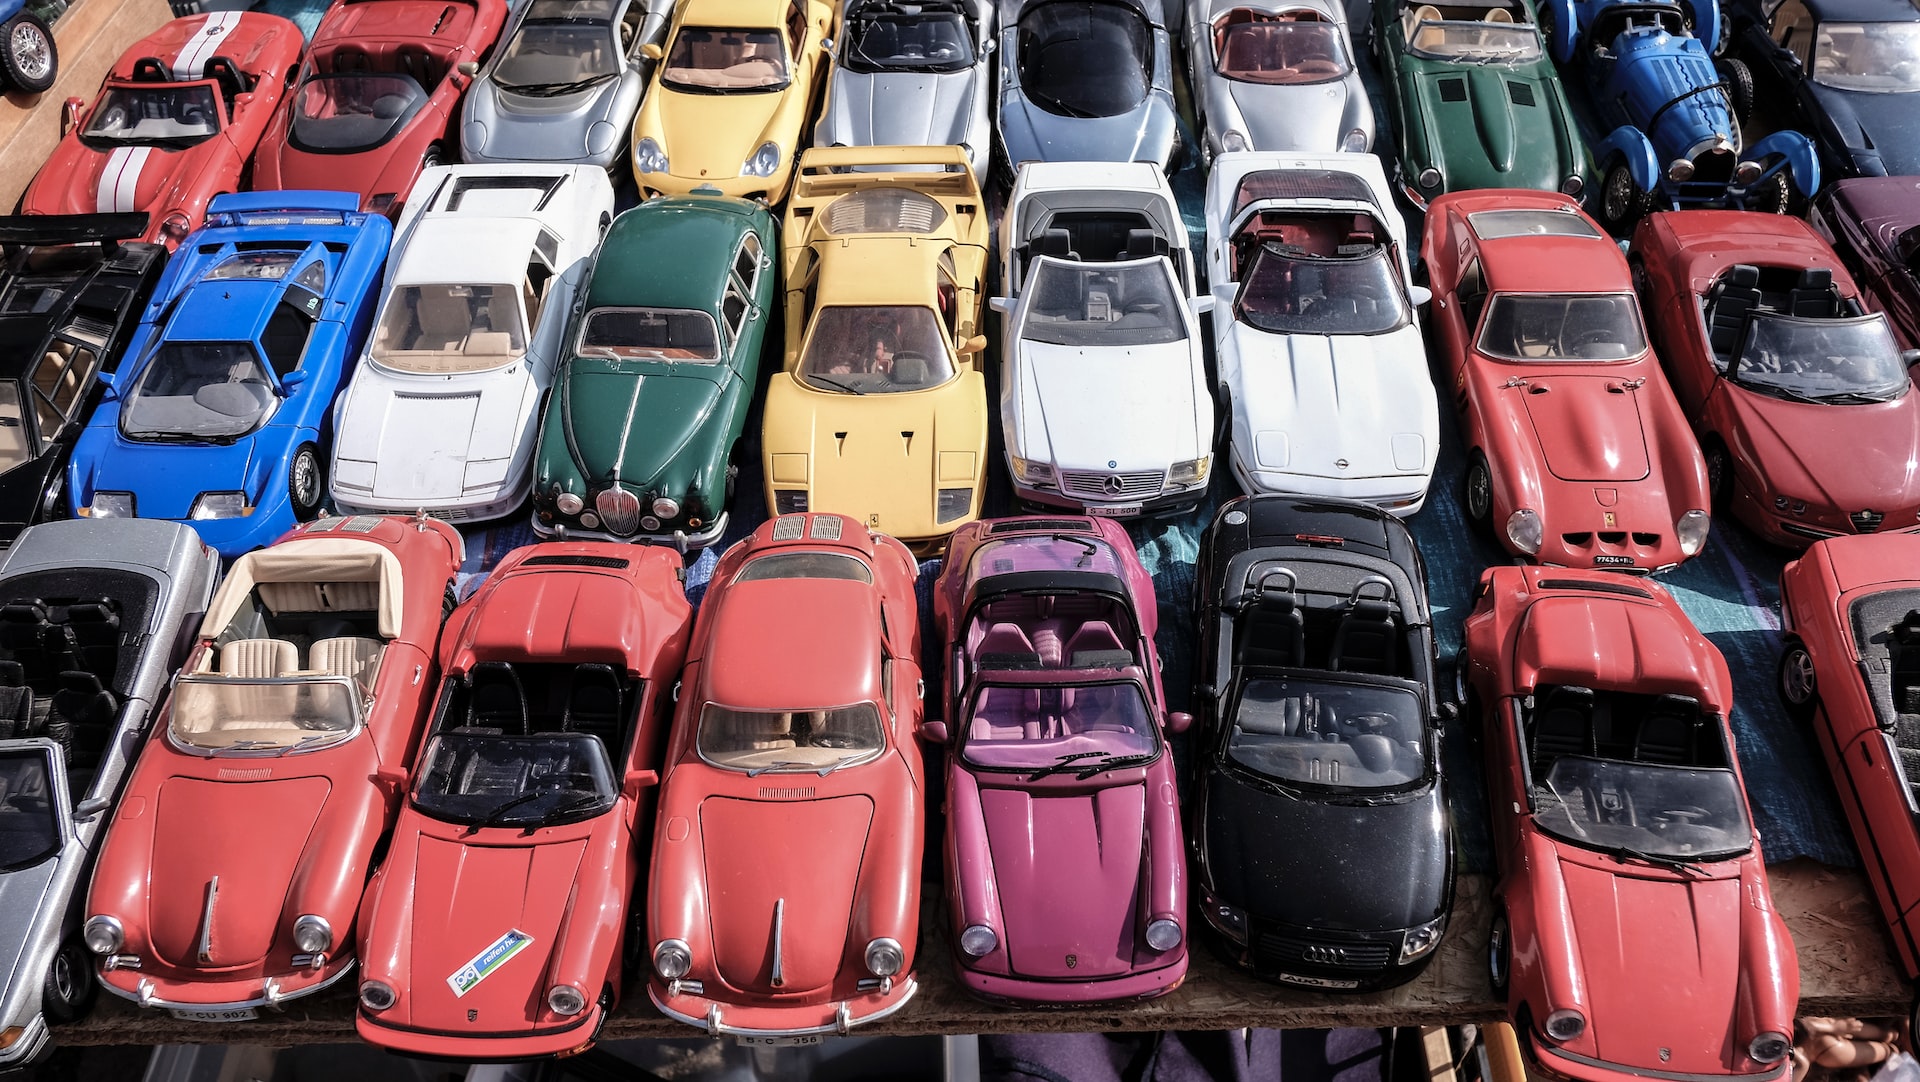 Rows of colorful cars, some of which are top down cars, parked closely together